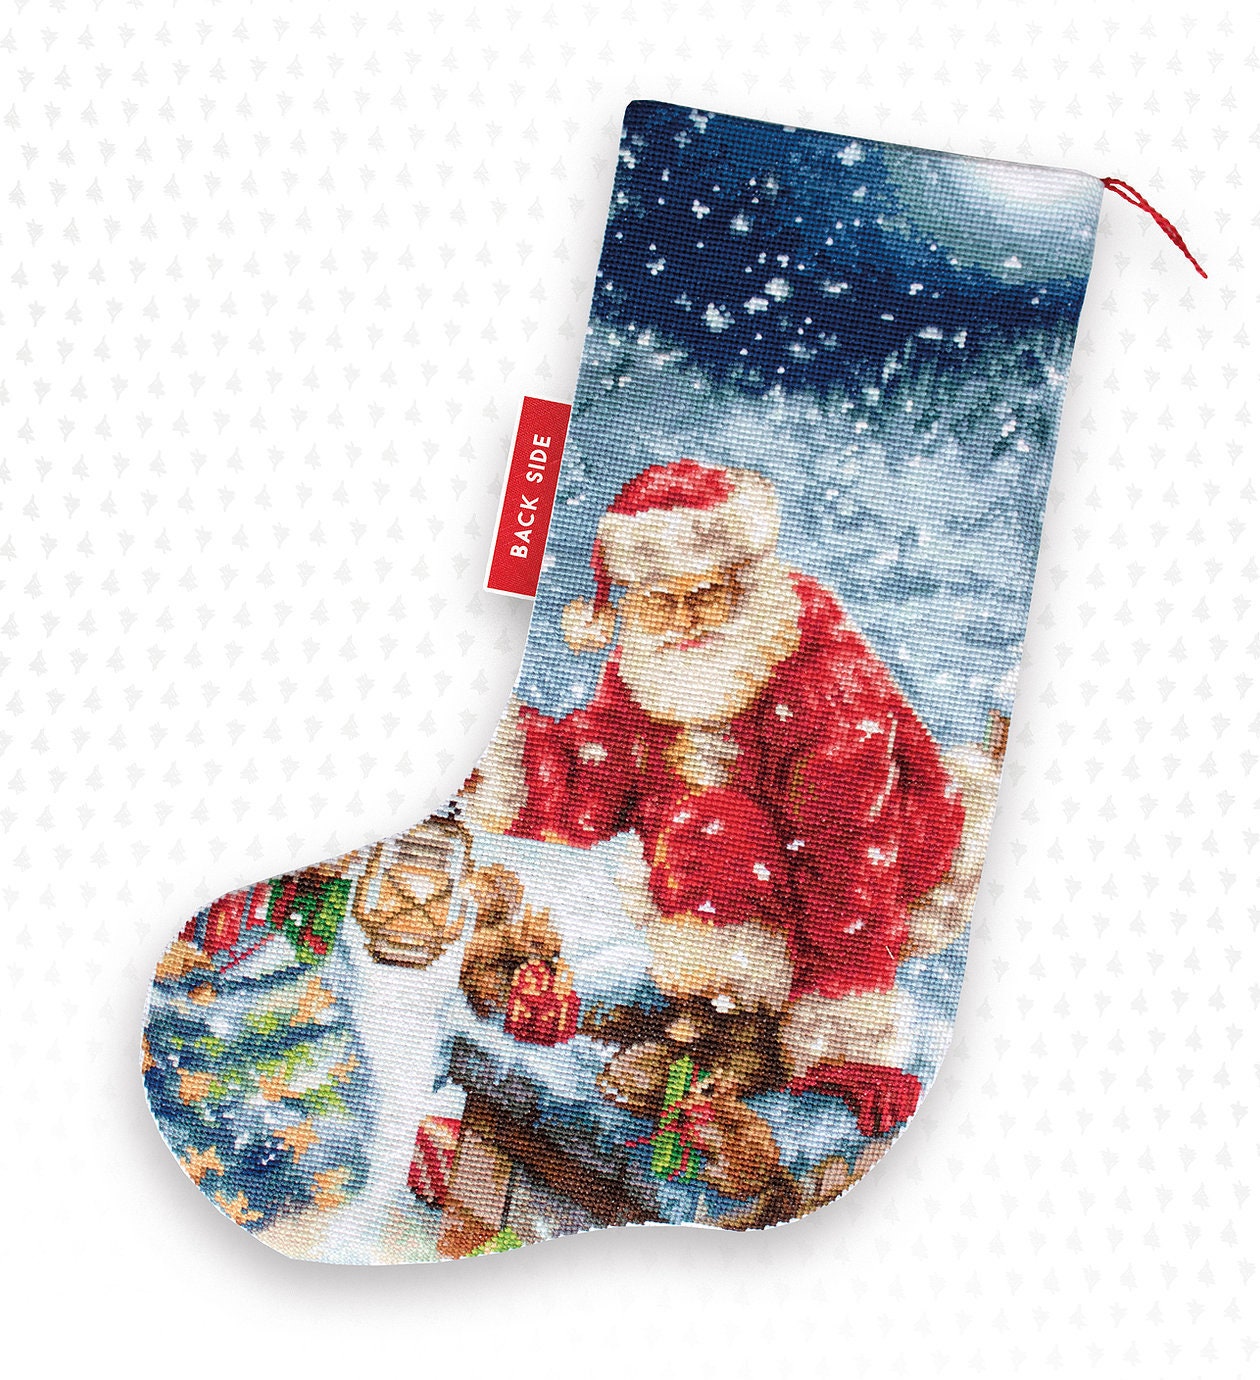 DIY Dimensions Here Comes Santa Counted Cross Stitch Stocking Kit 8492 7961